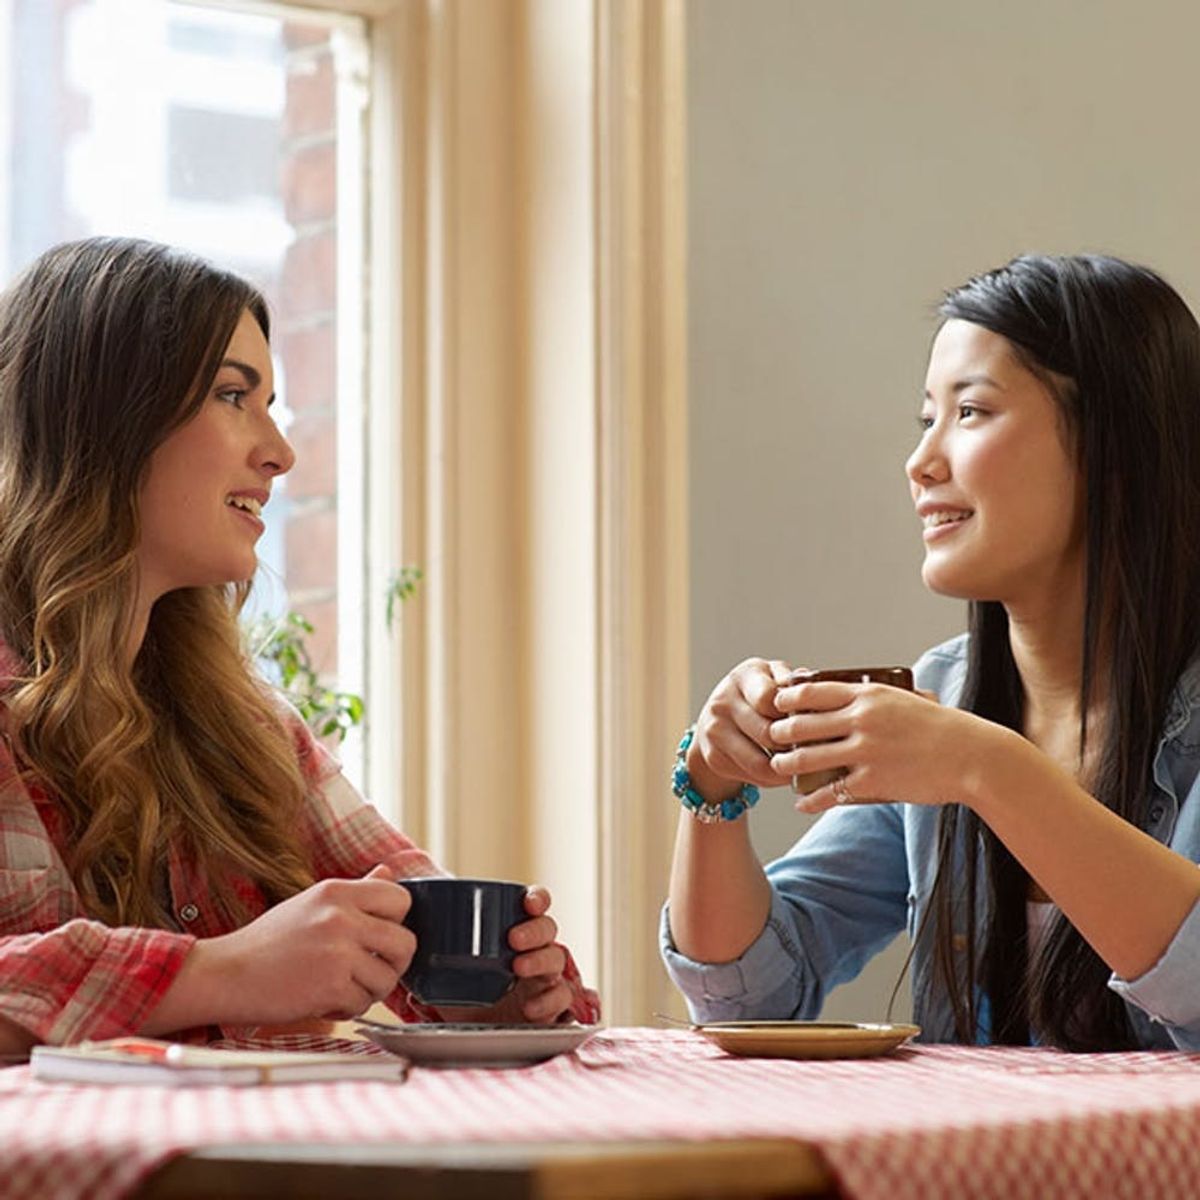 9 Tips for Setting Healthy Boundaries With Your Friends